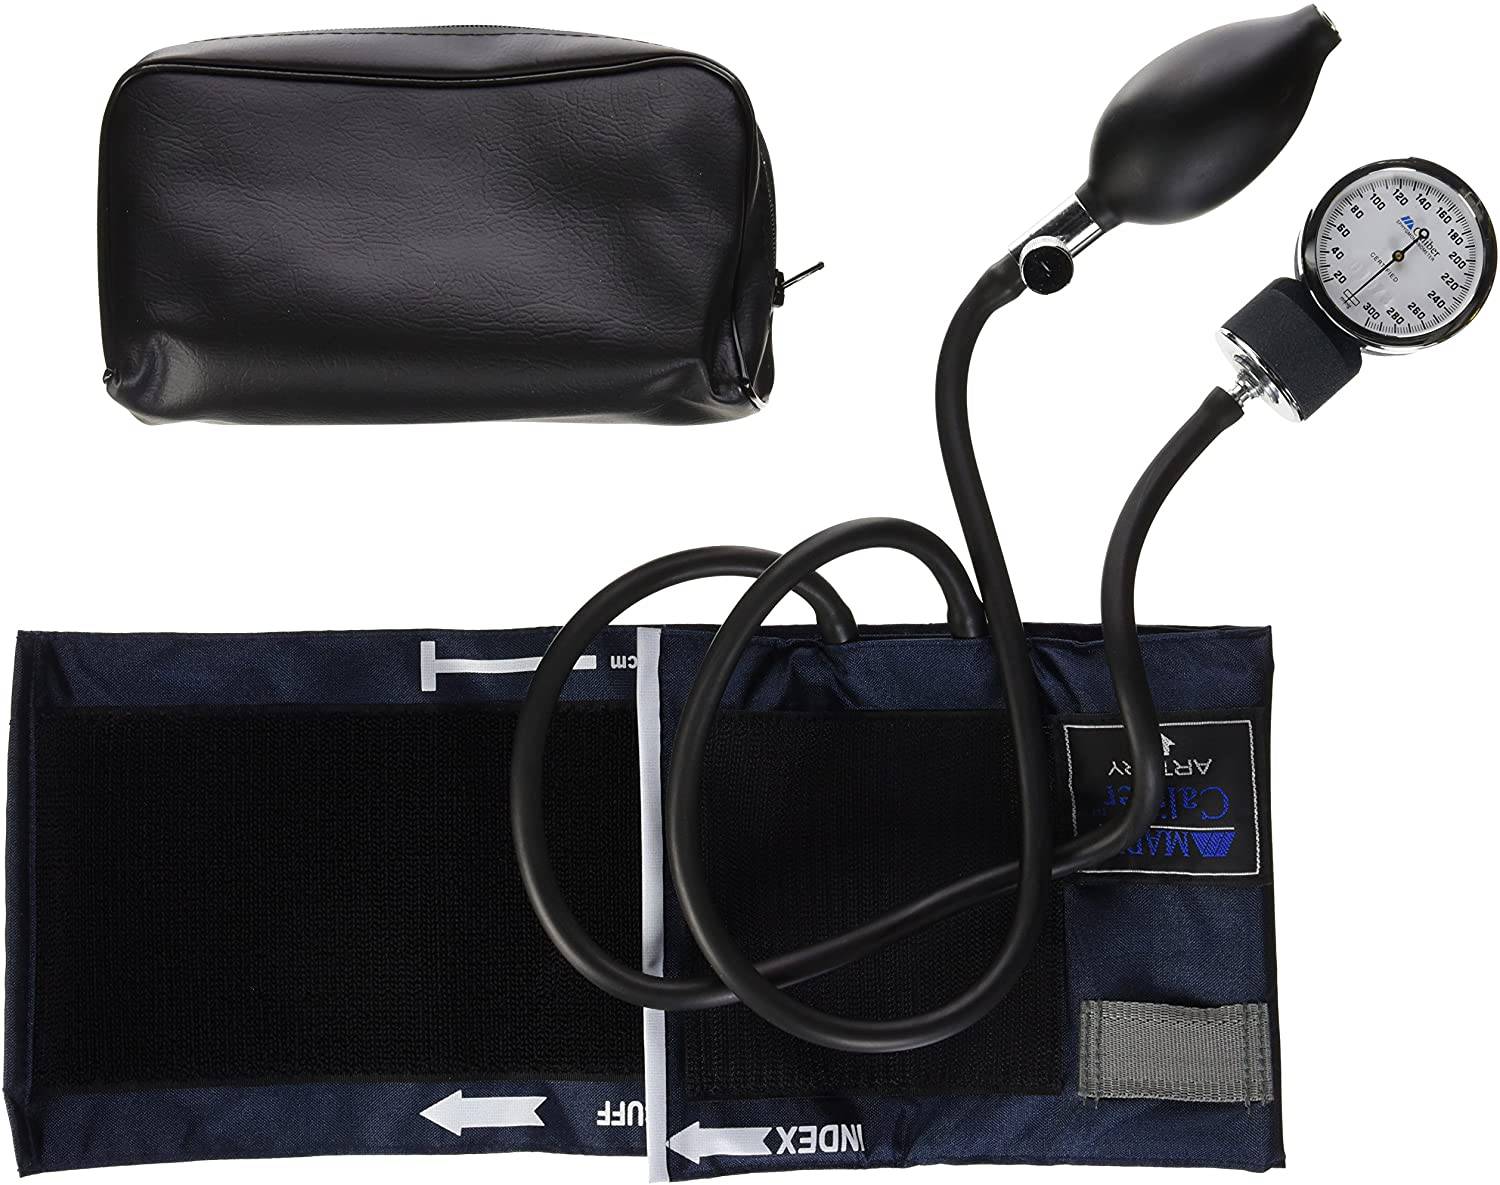 MABIS / DMS HOLDING 01-130-011 Caliber Aneroid Sphygmomanometer - To Your Door Medical  - Measurement Device